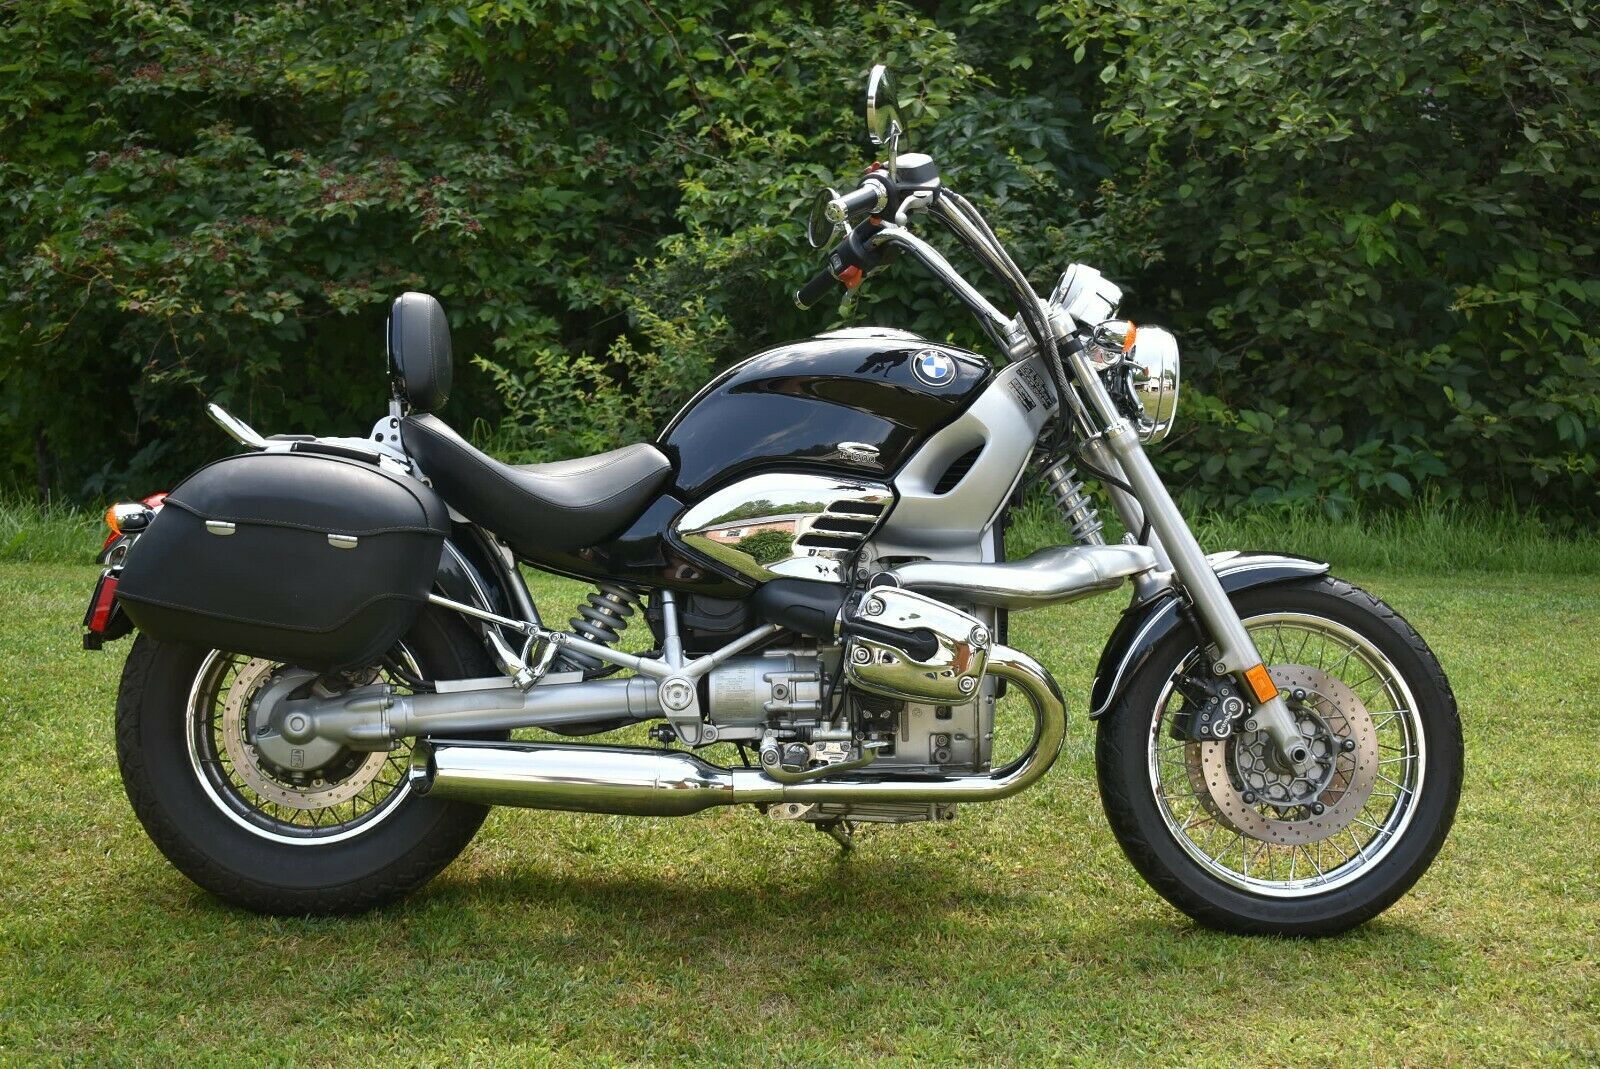 1999 Bmw R1200c  1999 Bmw R1200c  Sport Touring. 4.950 Miles. Abs, Fuel Injection.